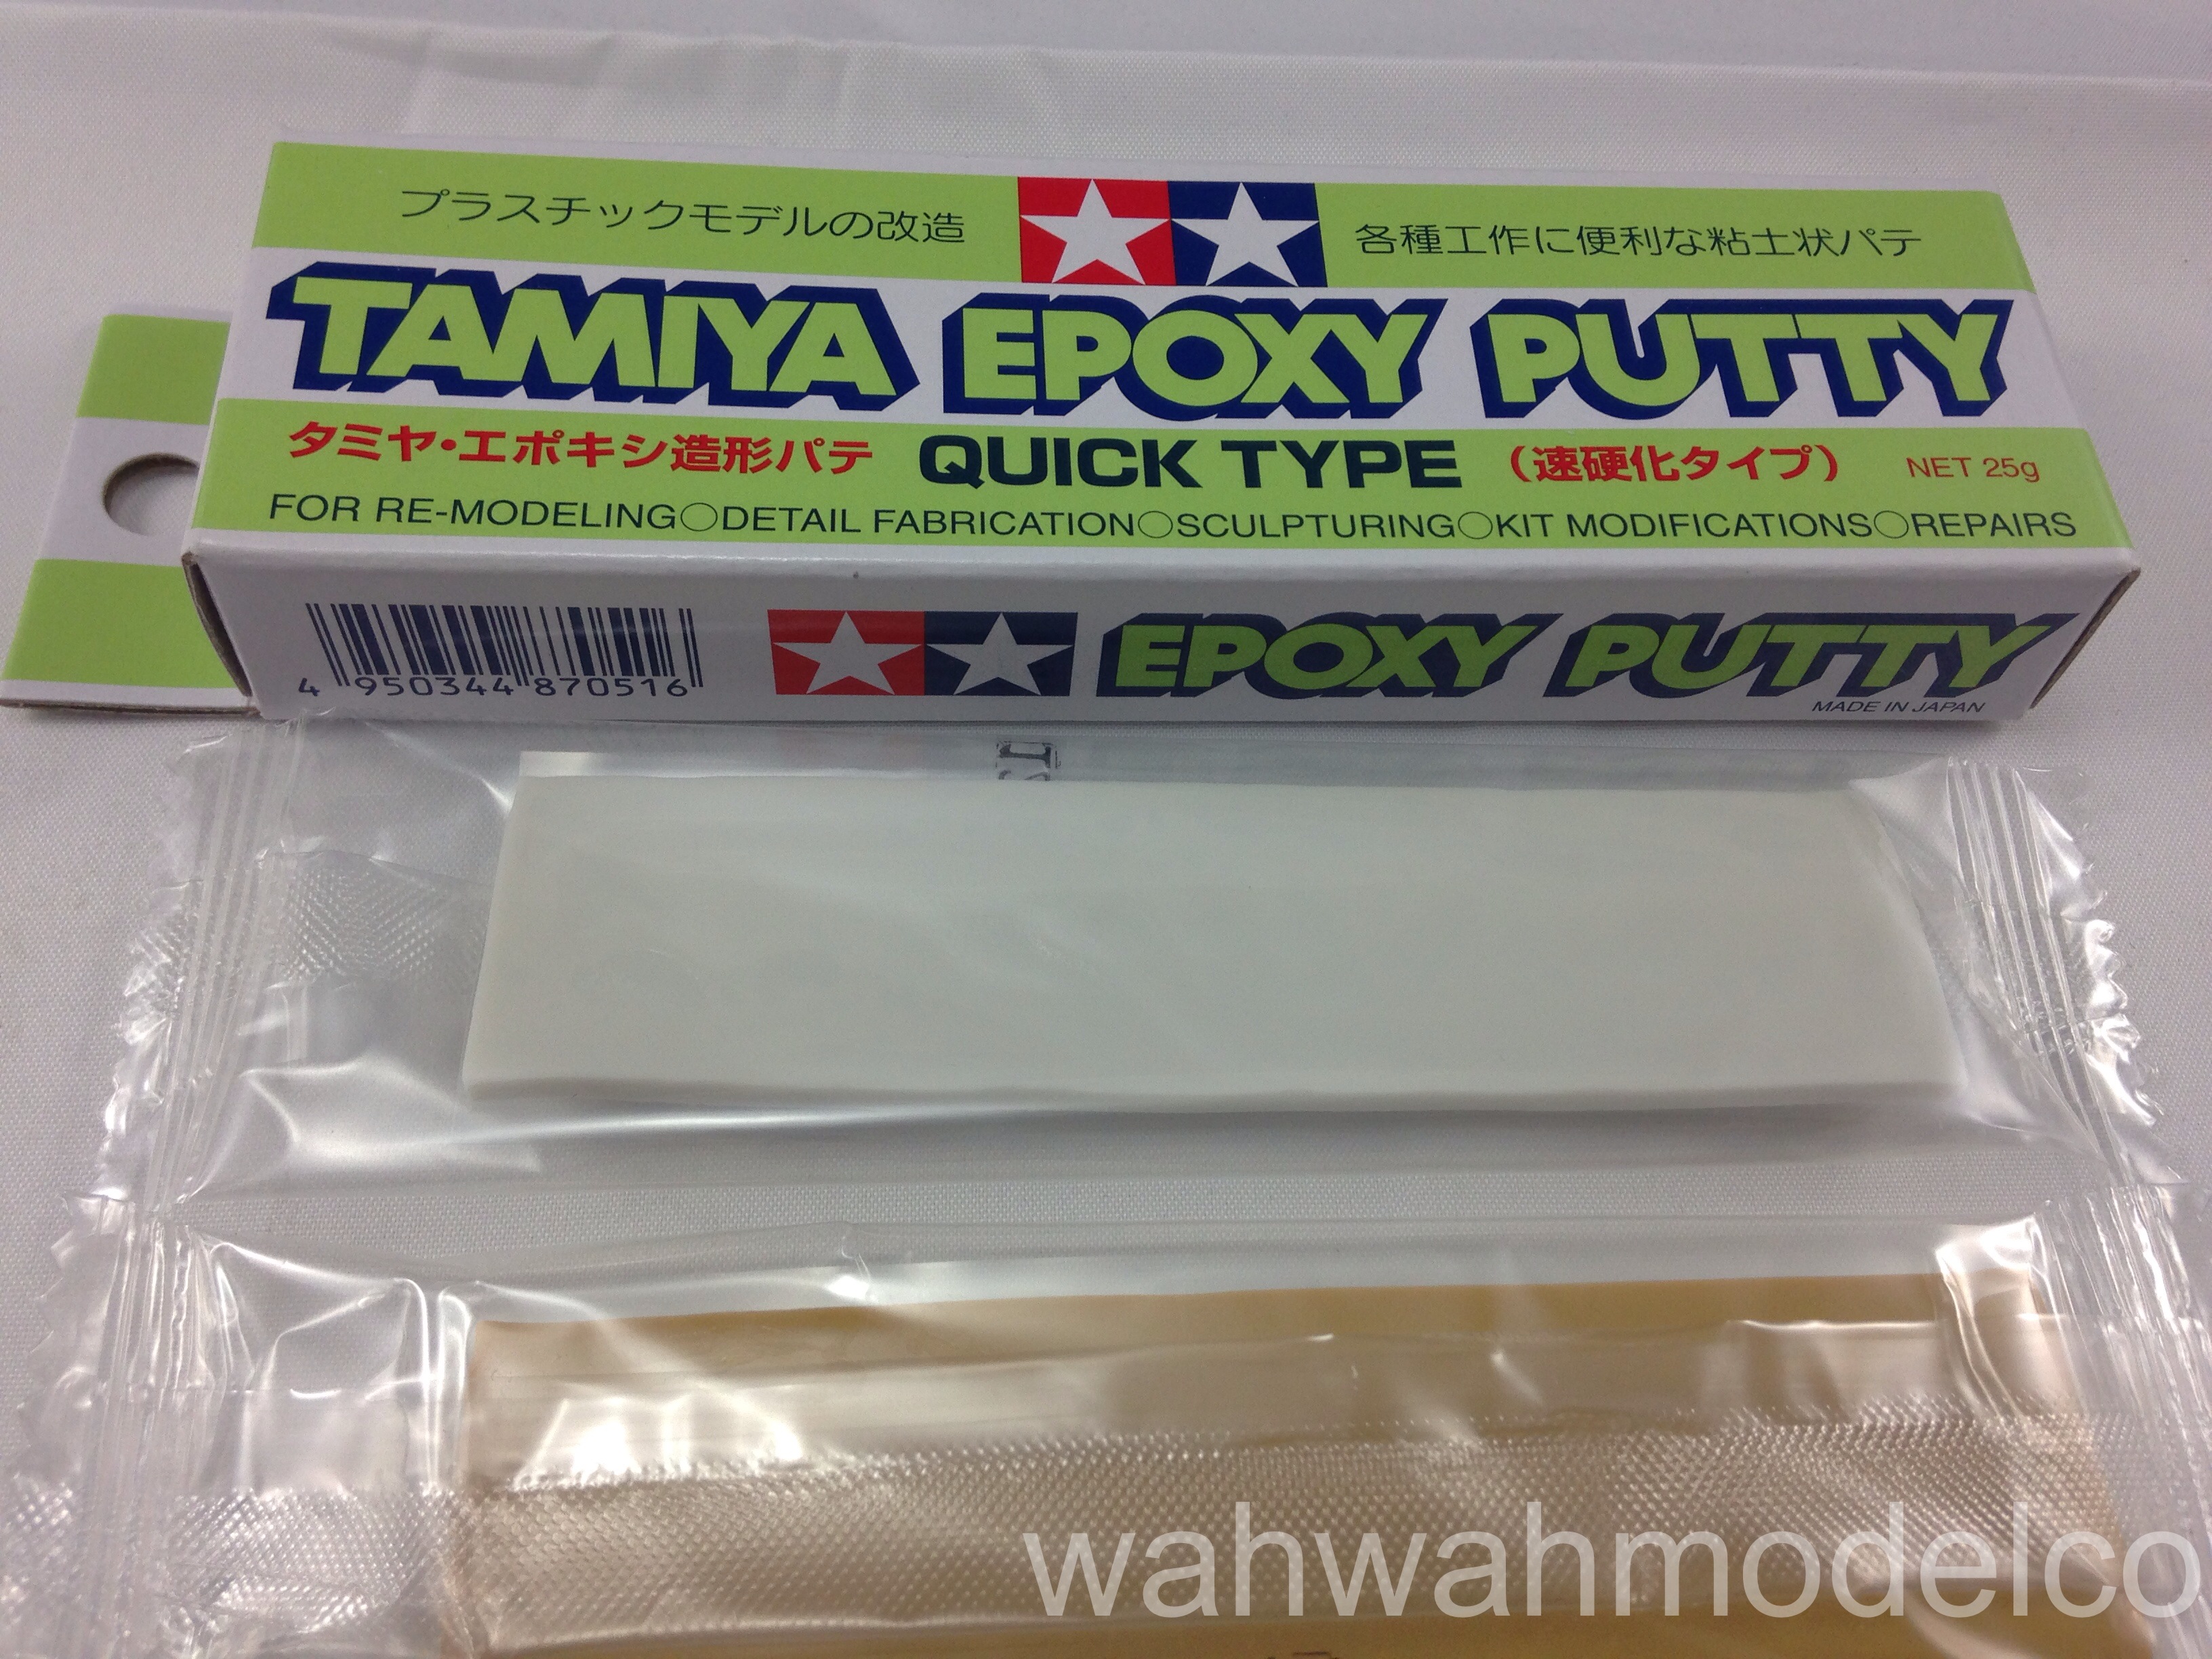 Tamiya: Putty - Epoxy Putty Quick Type. - 25 grams - for all kits (ref.  TAM87051), Paints and Tools > Putty